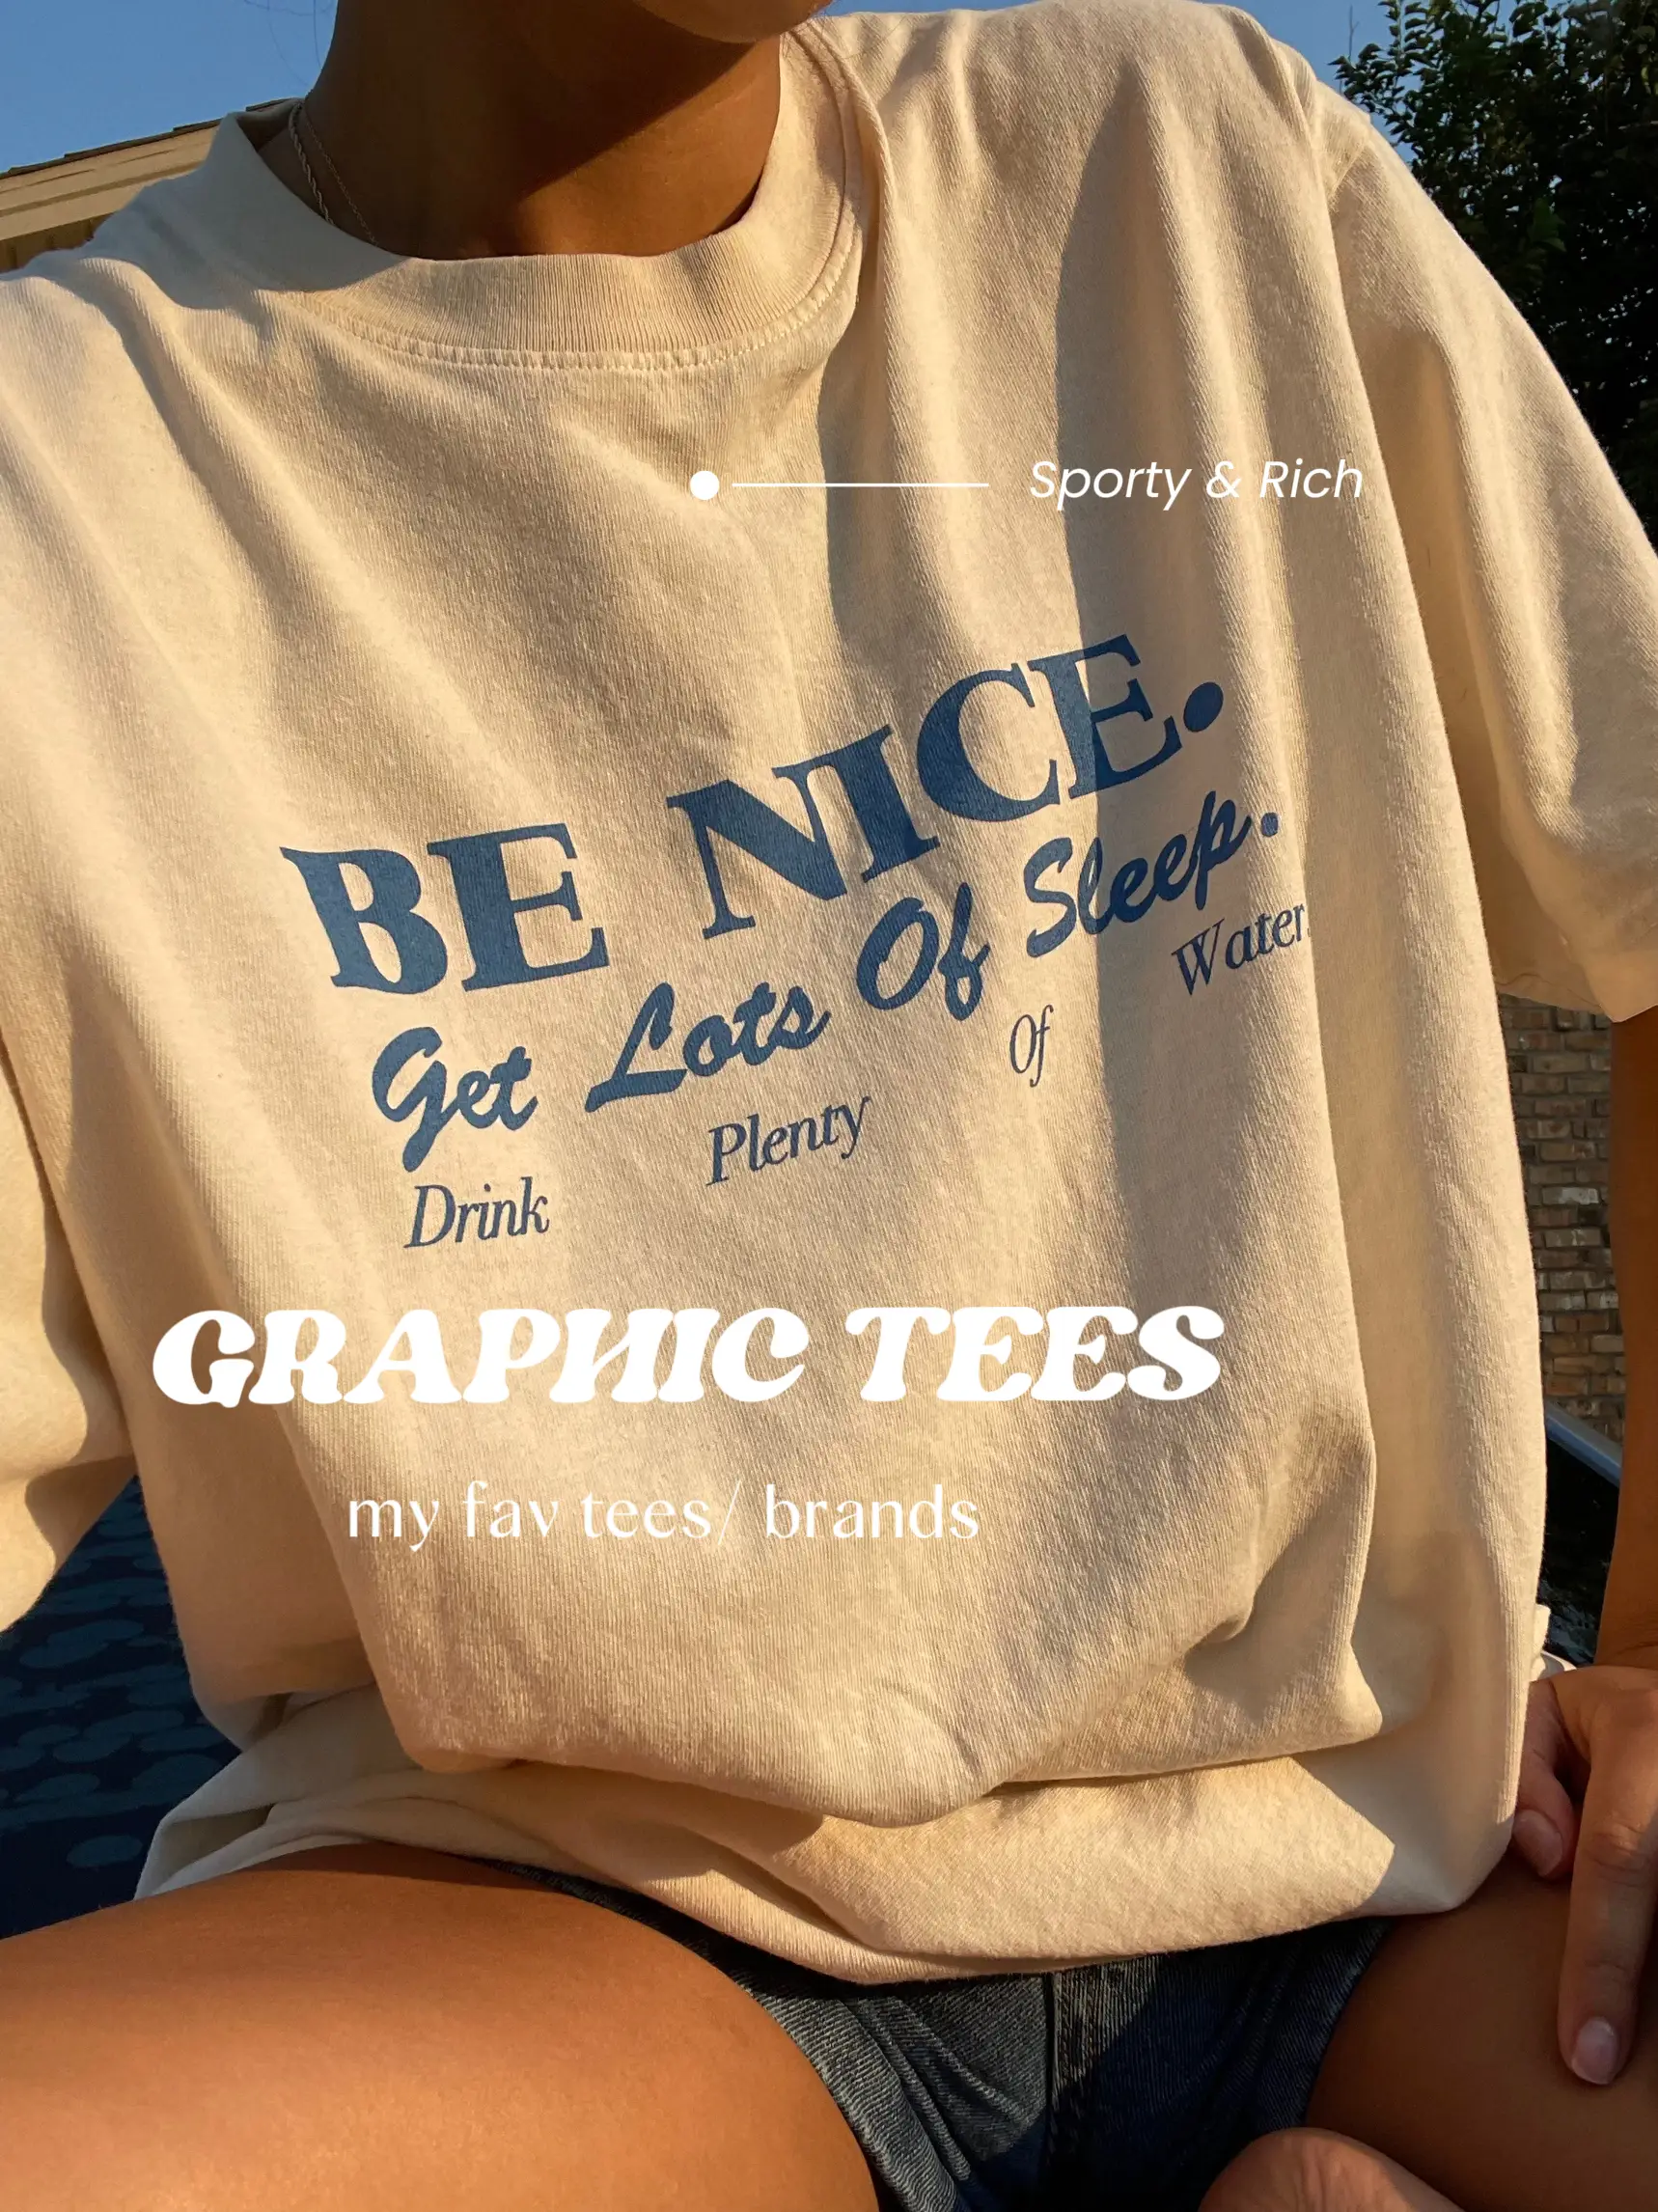 GRAPHIC TEES's images(0)